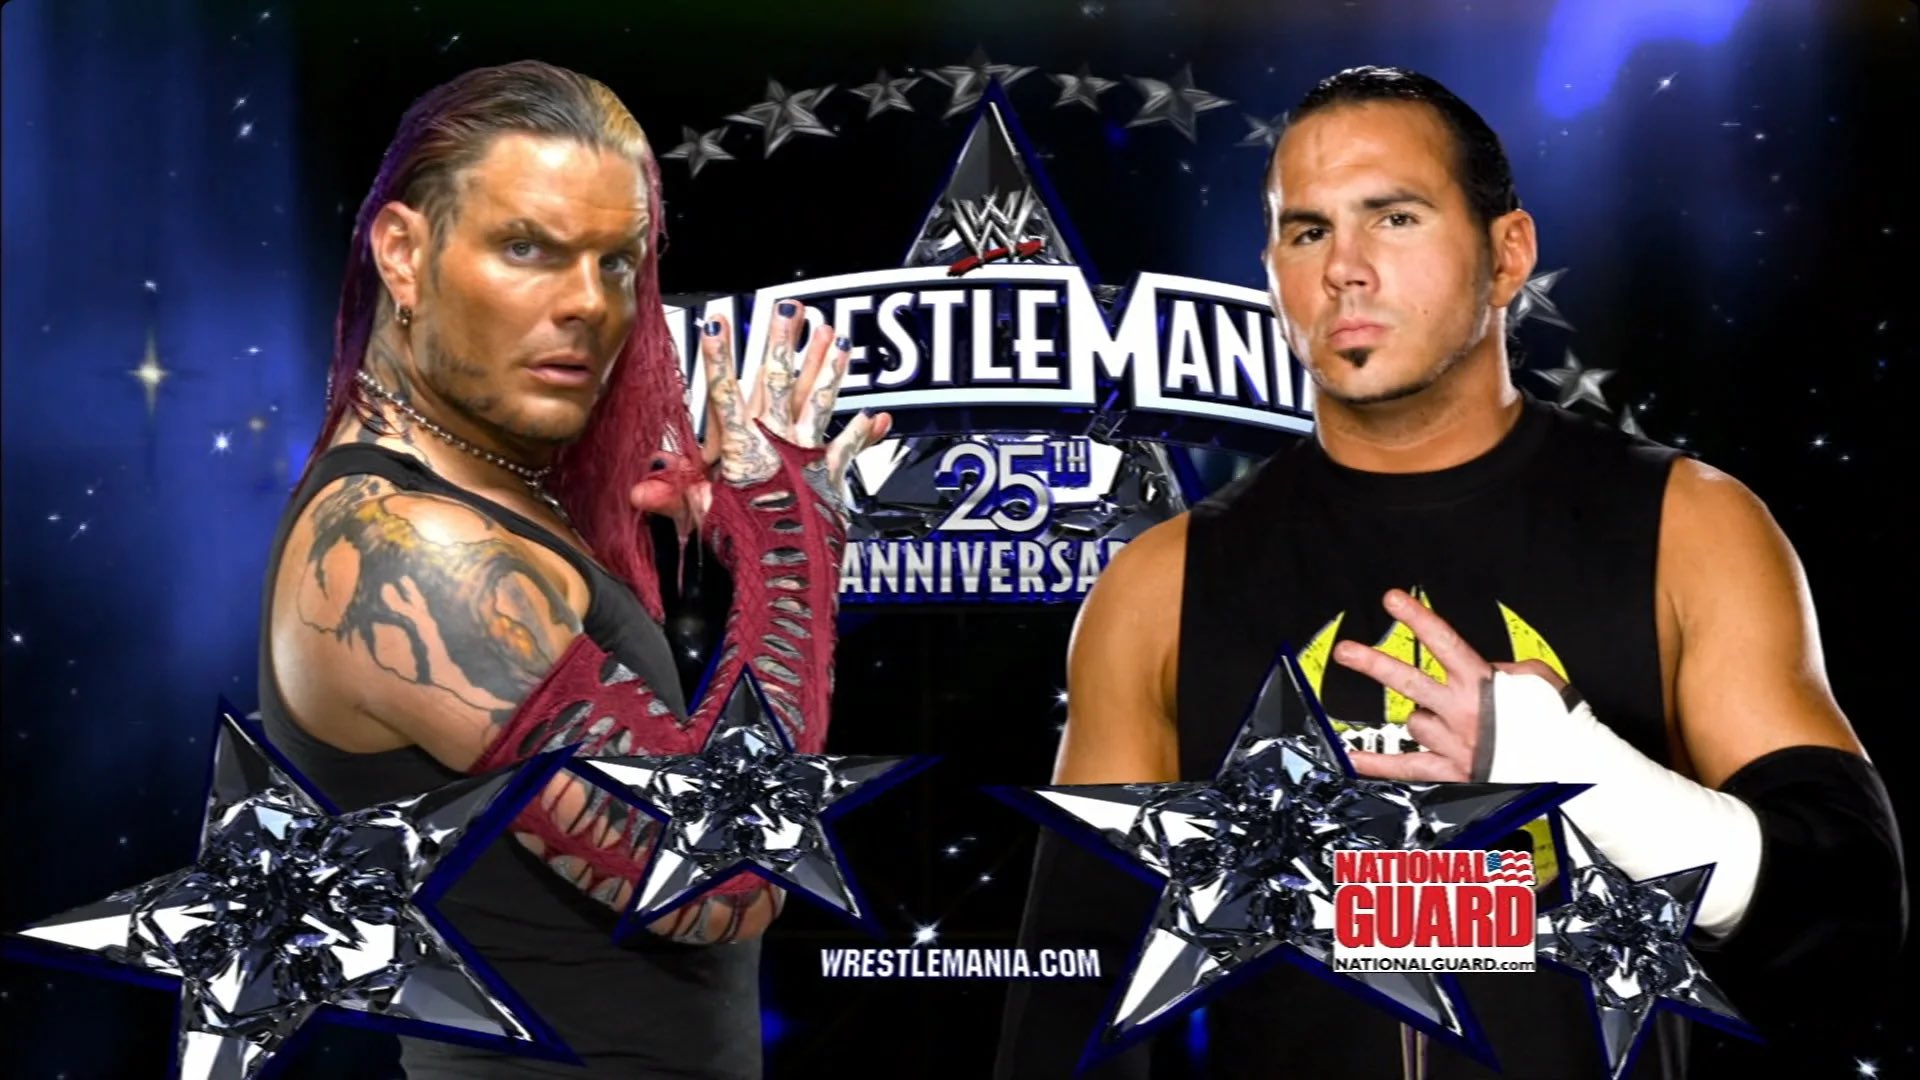 A brother vs. brother match between Matt Hardy and Jeff Hardy at WWE WrestleMania.